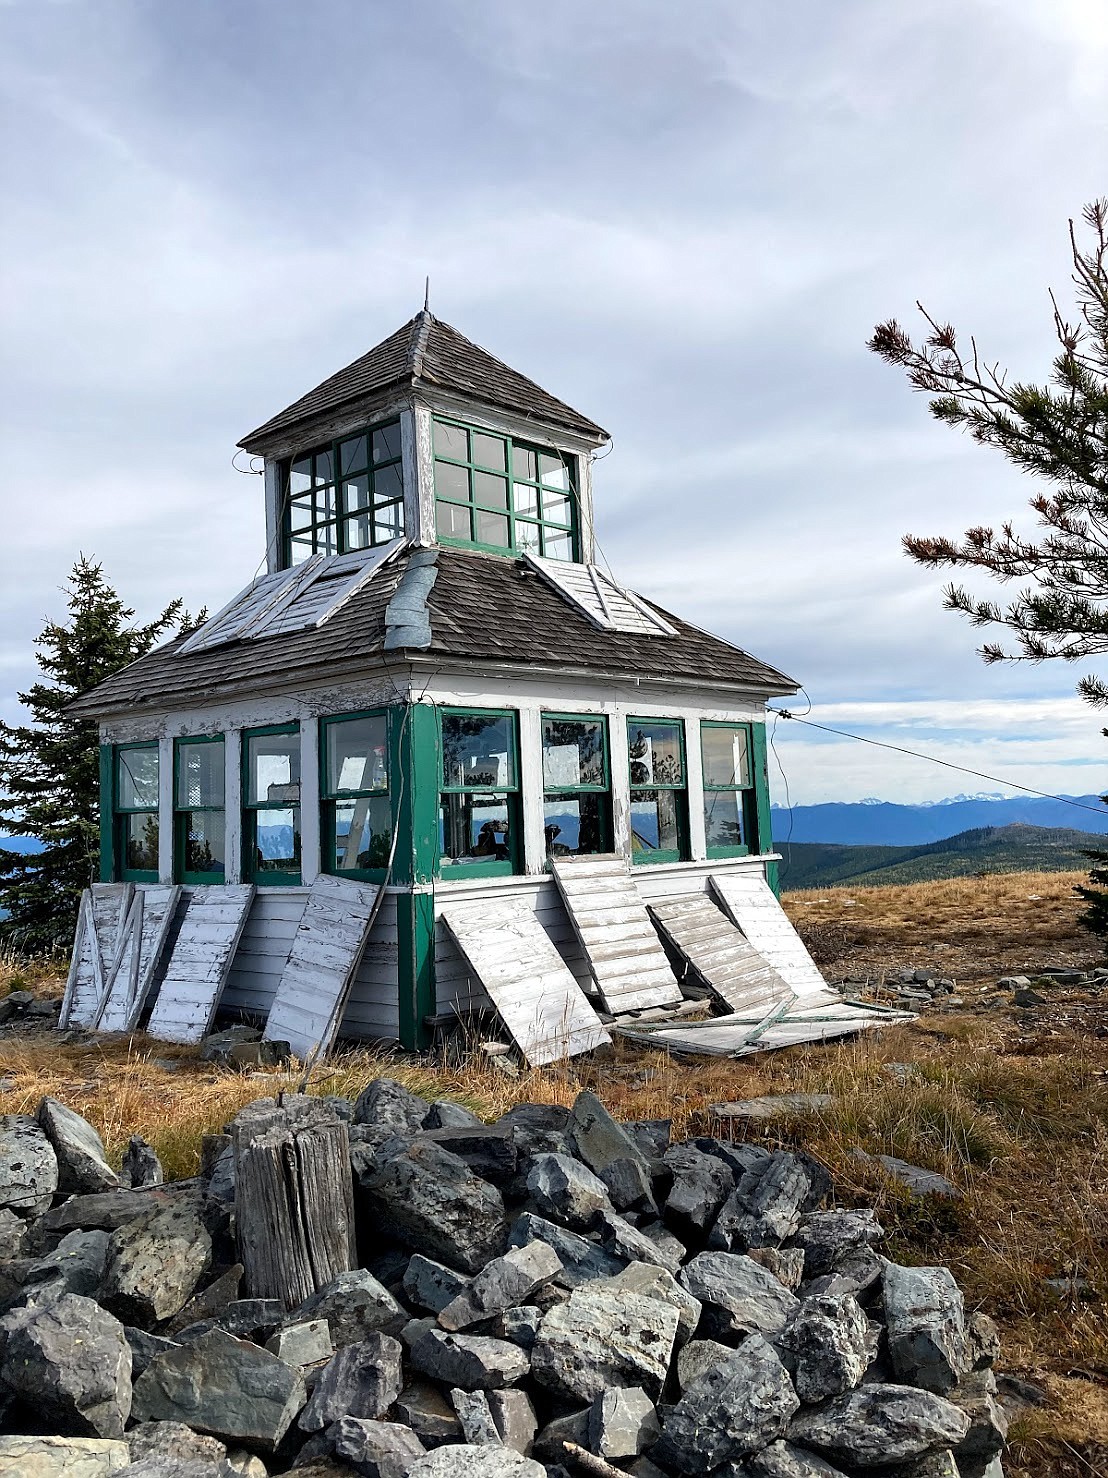 The McGuire Mountain Lookout near Eureka is accessible only from a 2-mile trail. (Bret Serbin/Daily Inter Lake)